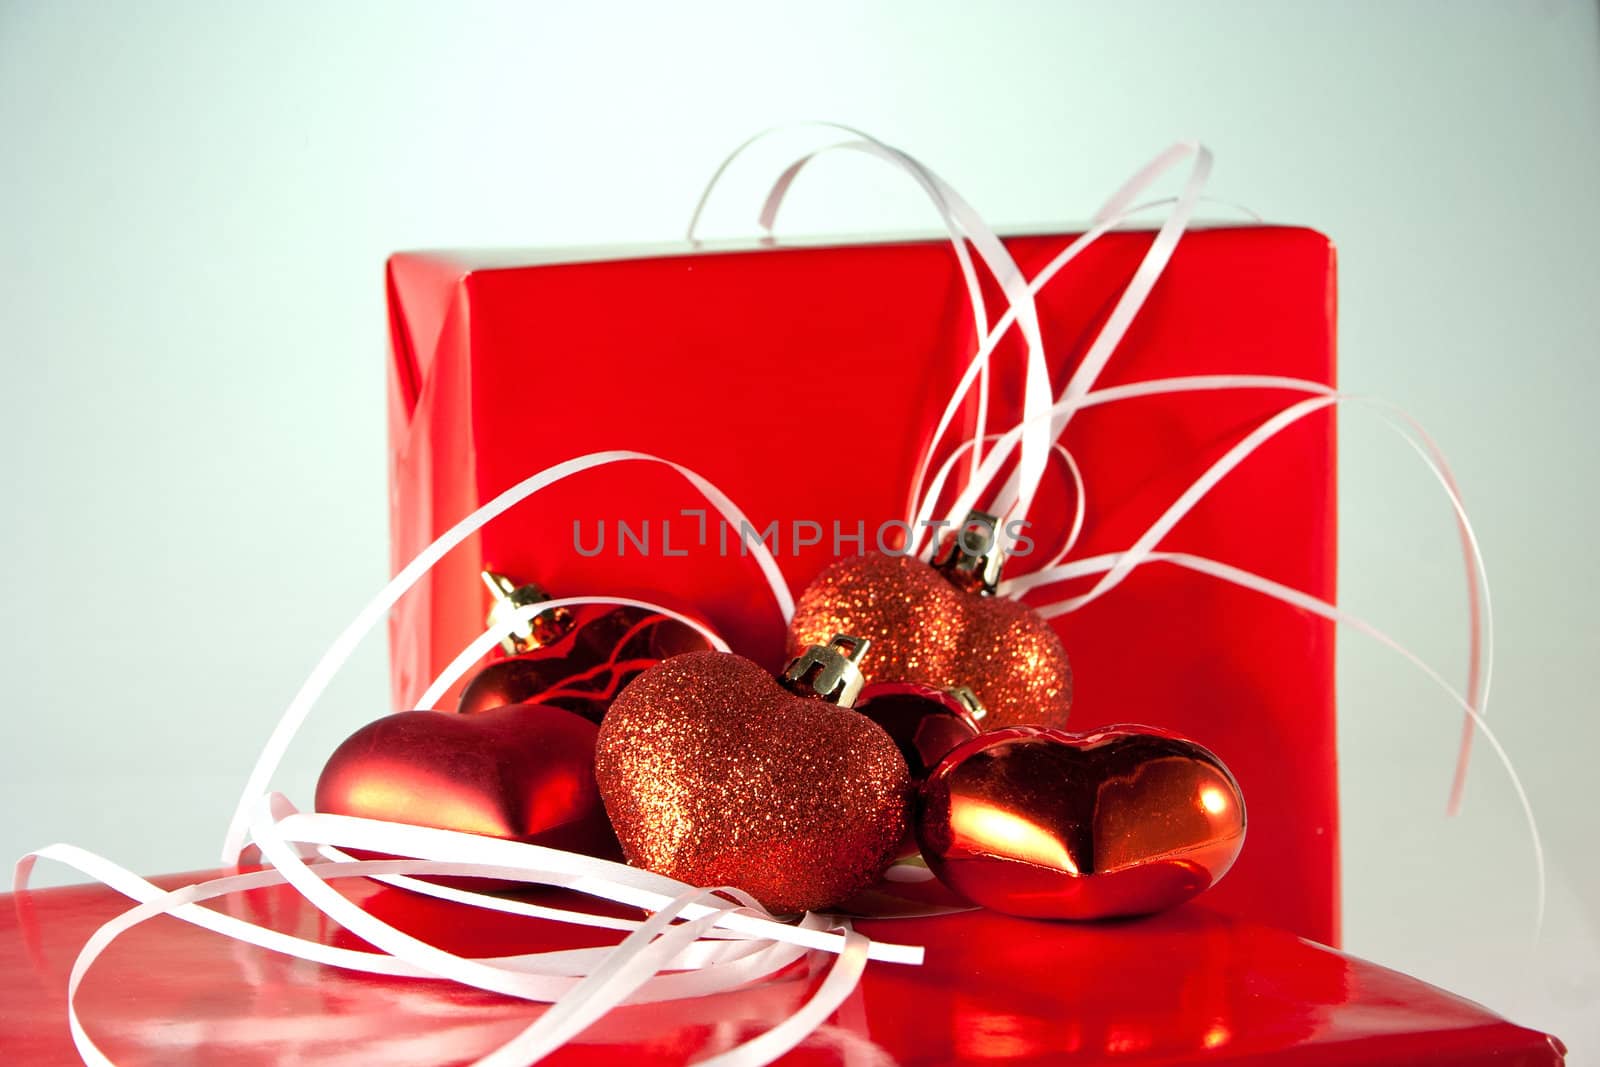 Red Hearts on wrapped gifts in red paper